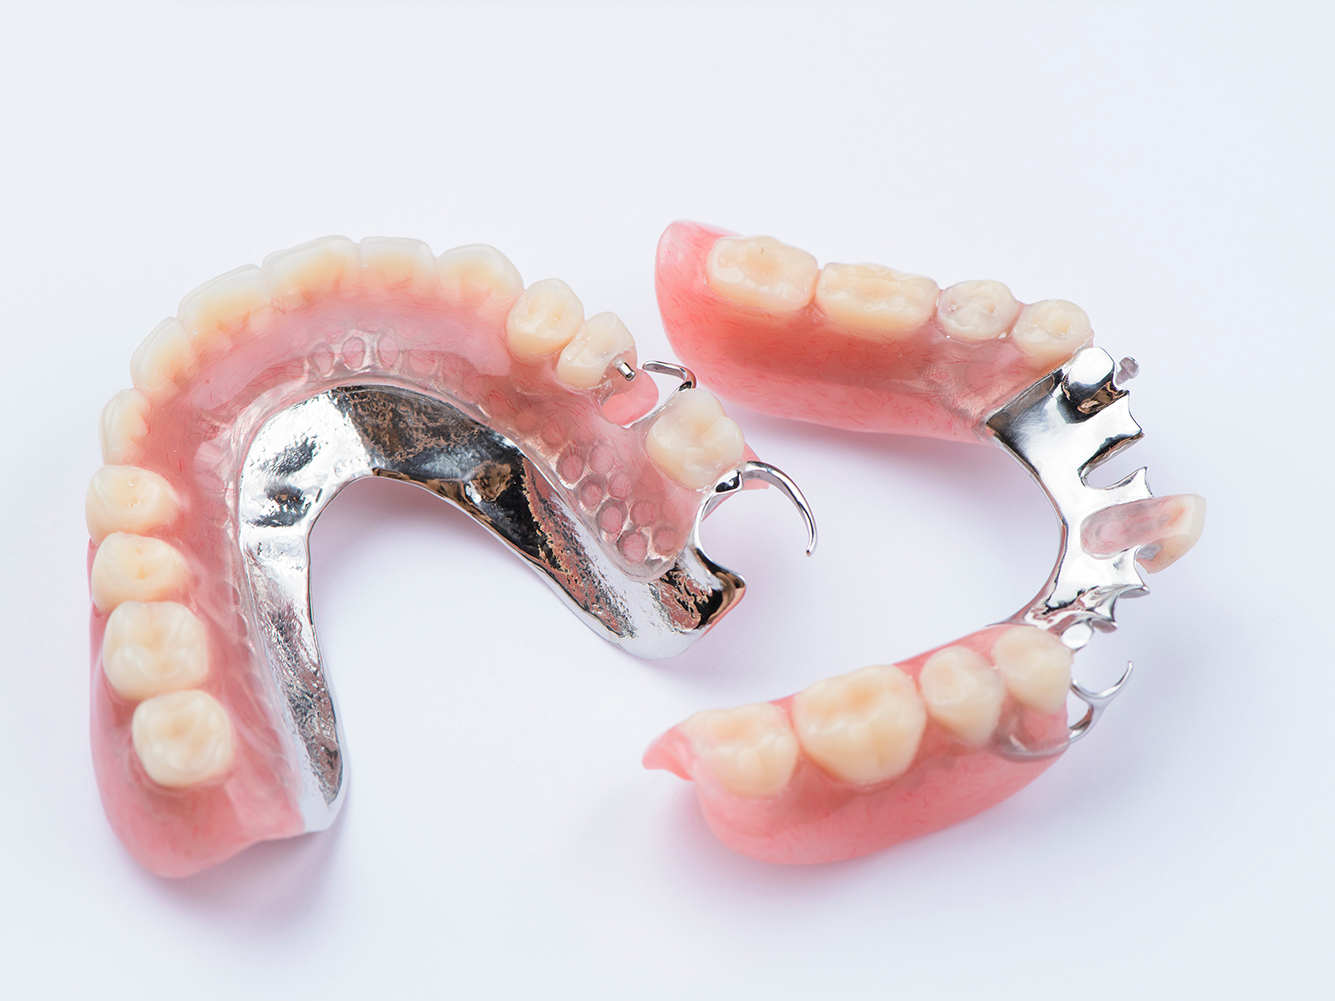 a pair of dentures with metal framework on two different partial dentures